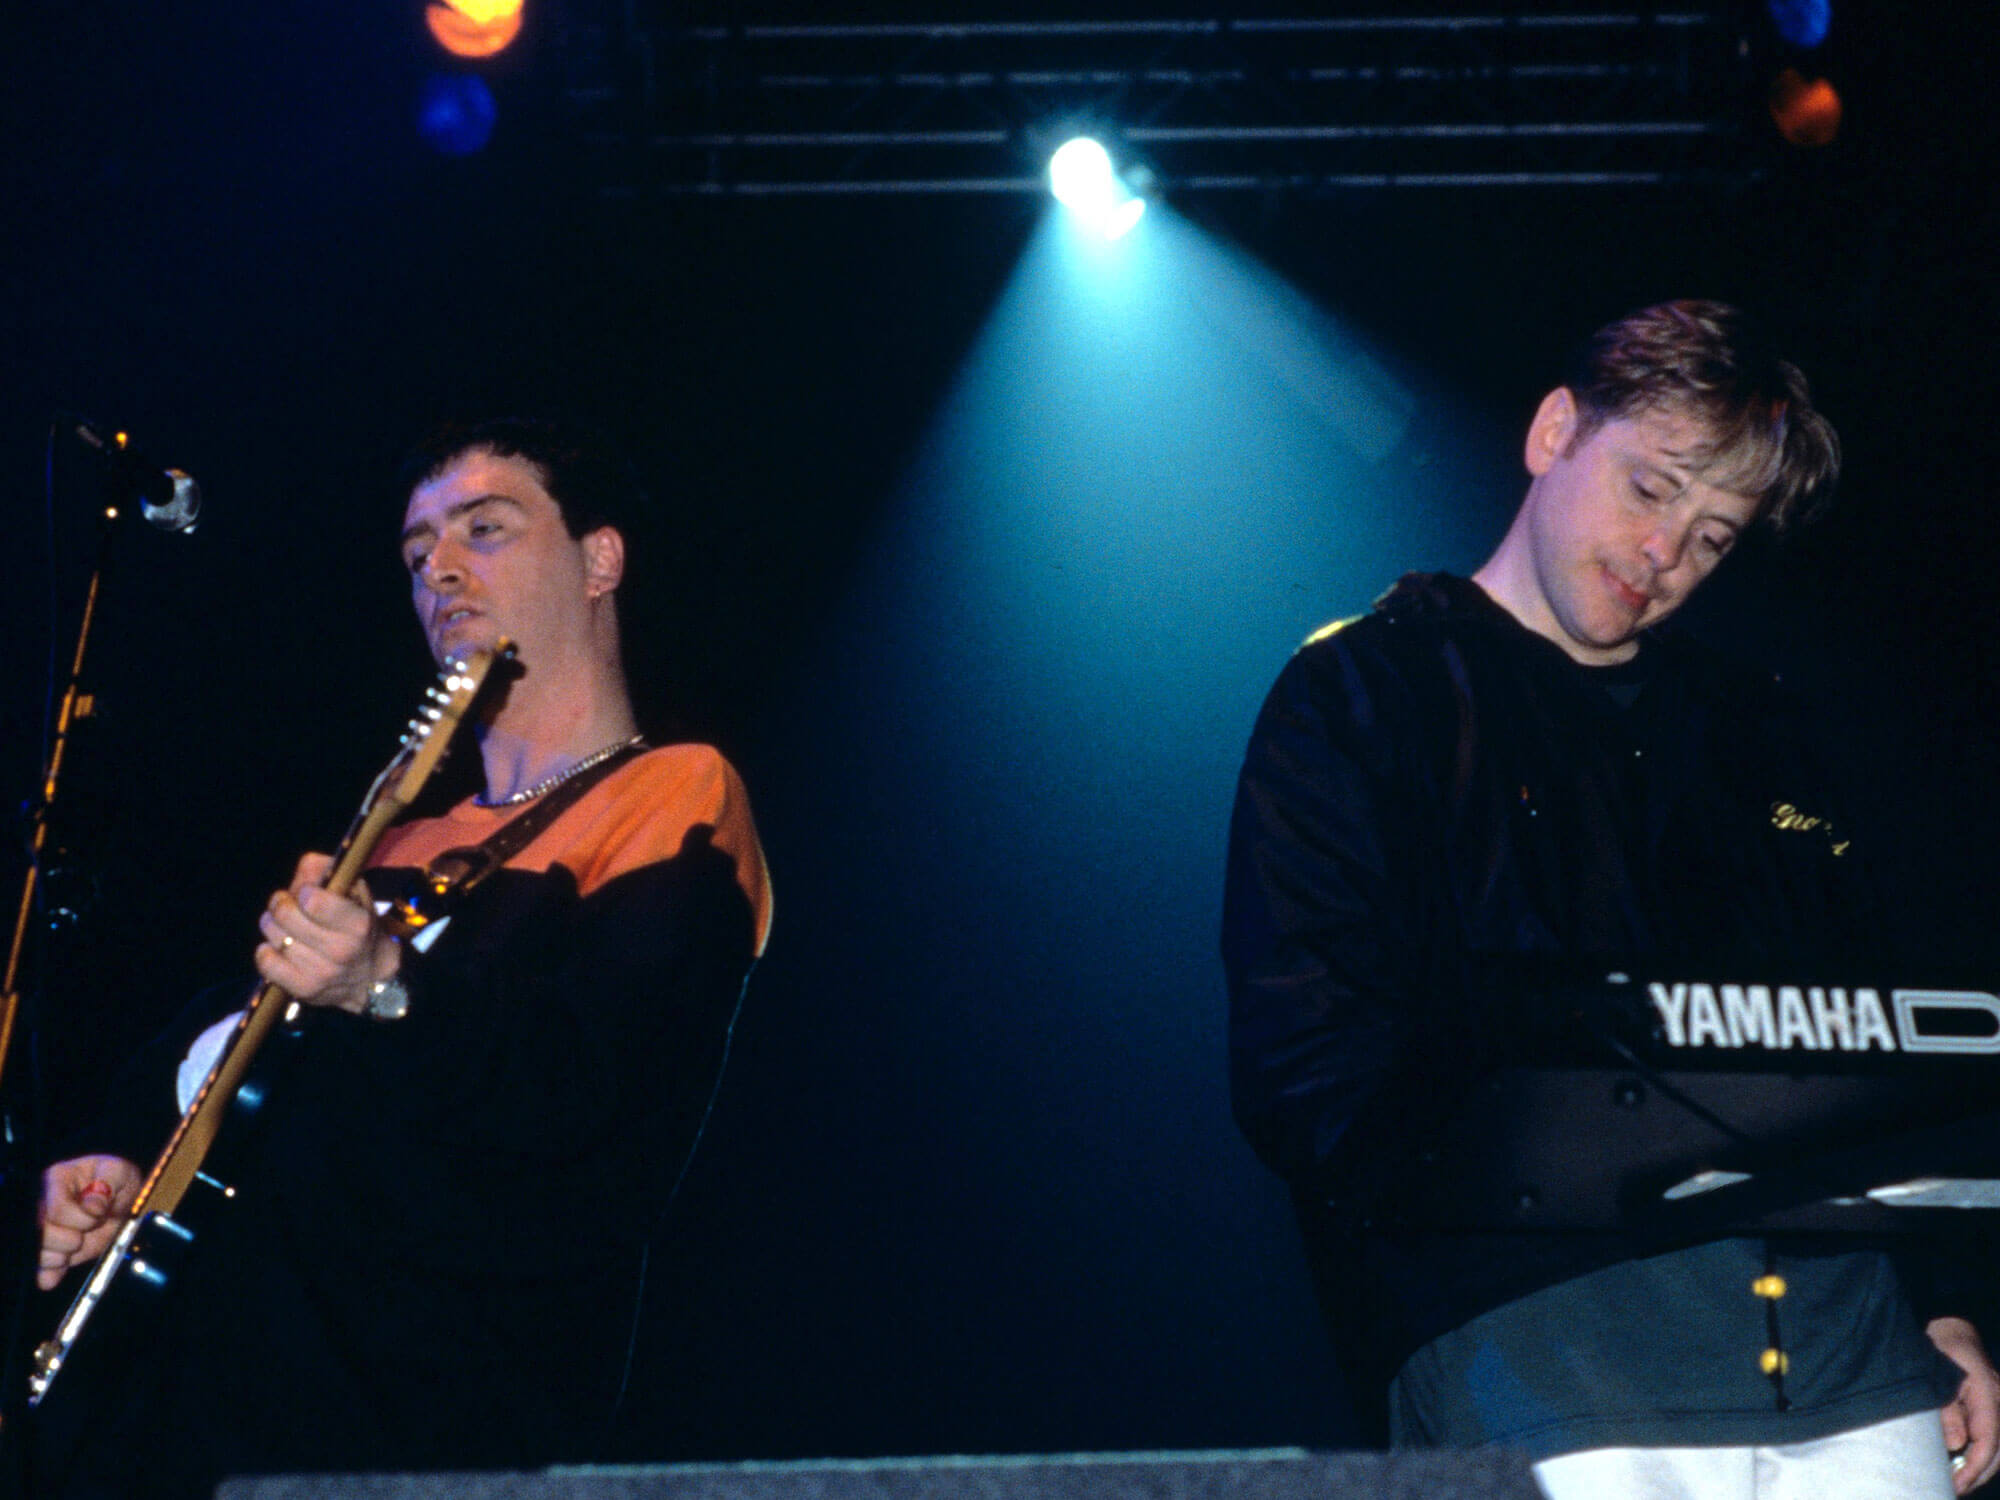 Johnny Marr and Bernard Sumner performing as part of Electronic.